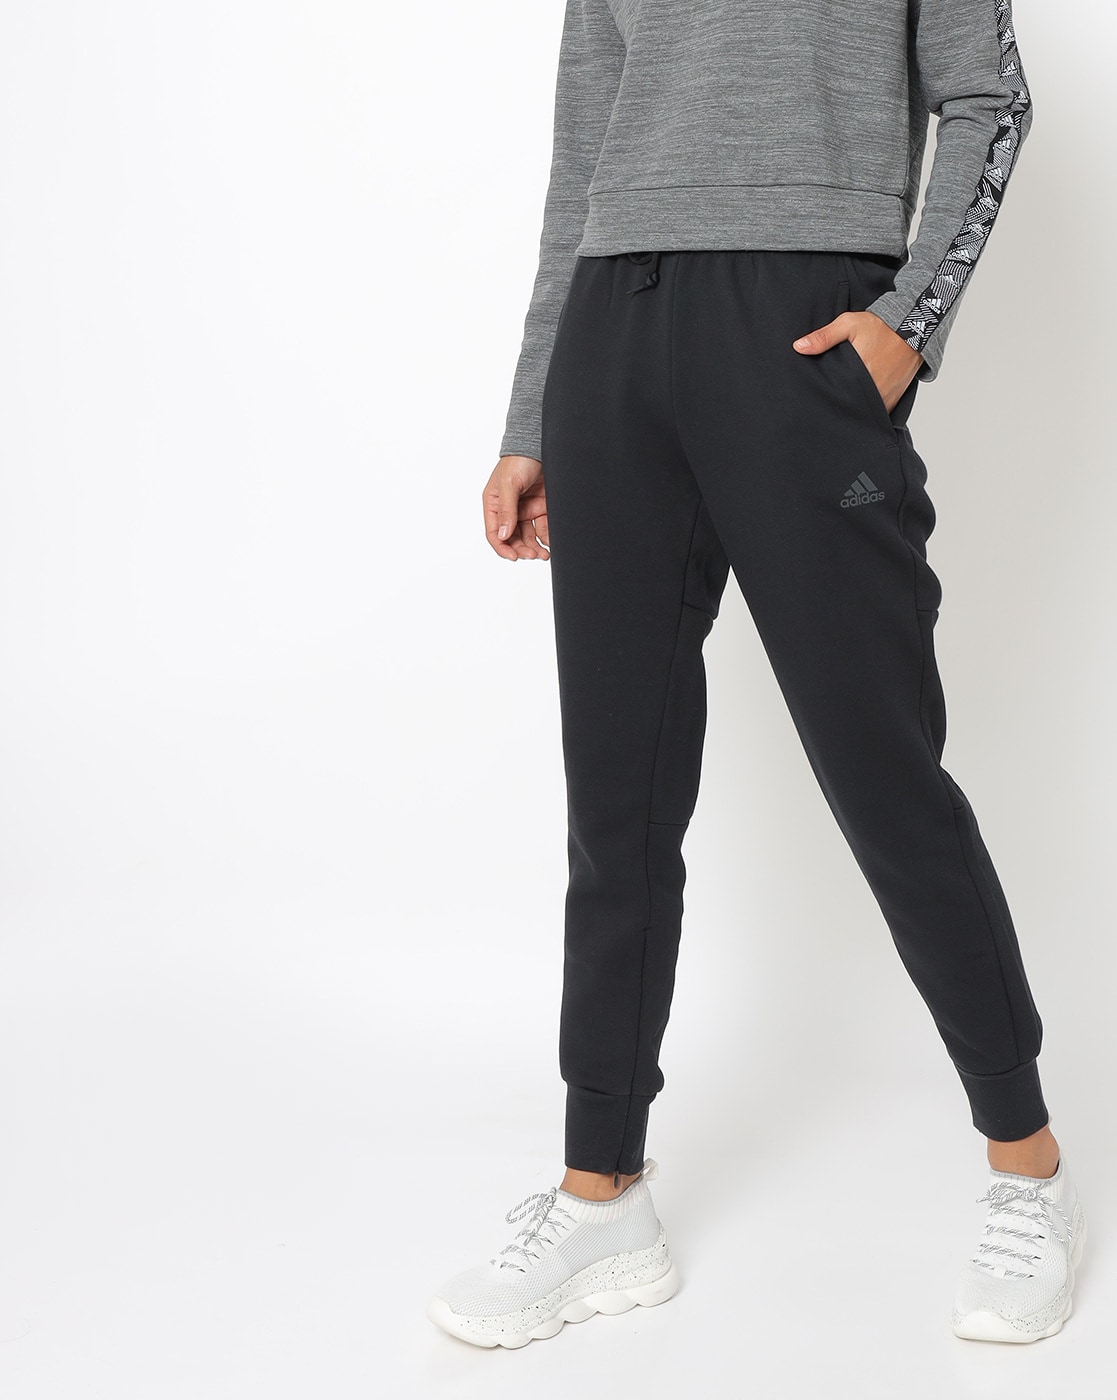 adidas trousers online